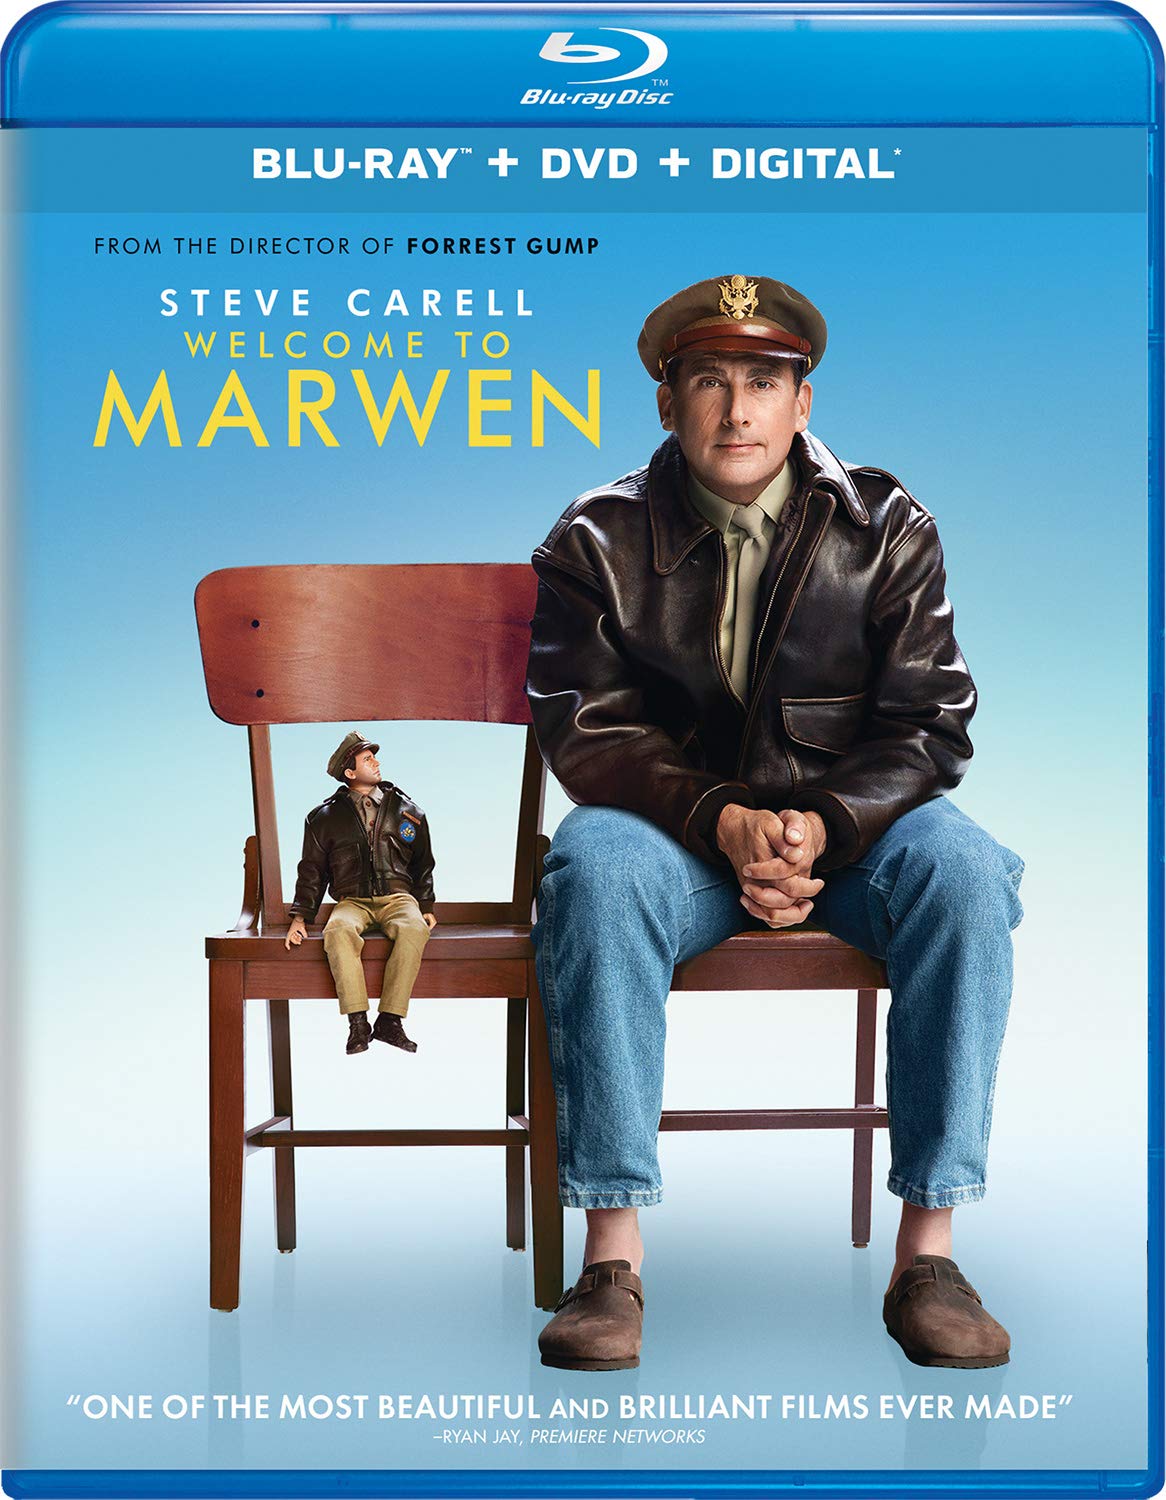 Welcome to Marwen DVD Release Date April 9, 20191166 x 1500